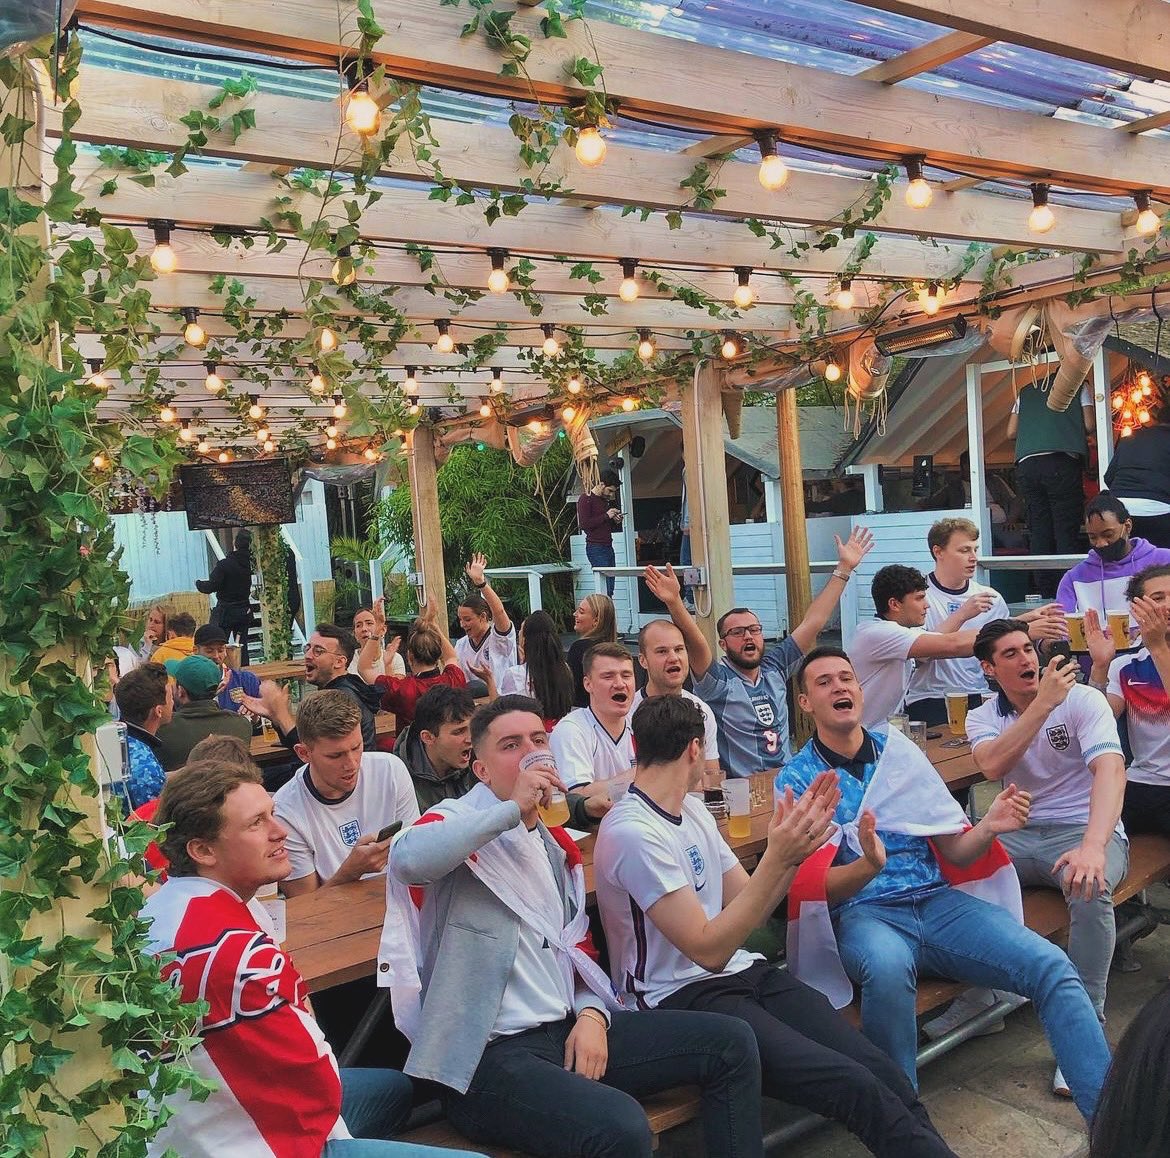 Get the bests seats in the house!

Score your spot for the Euro 2024 tournament with us today! ⚽️

#Itscominghome #Euro2024 #brixton #hopeandanchorsw